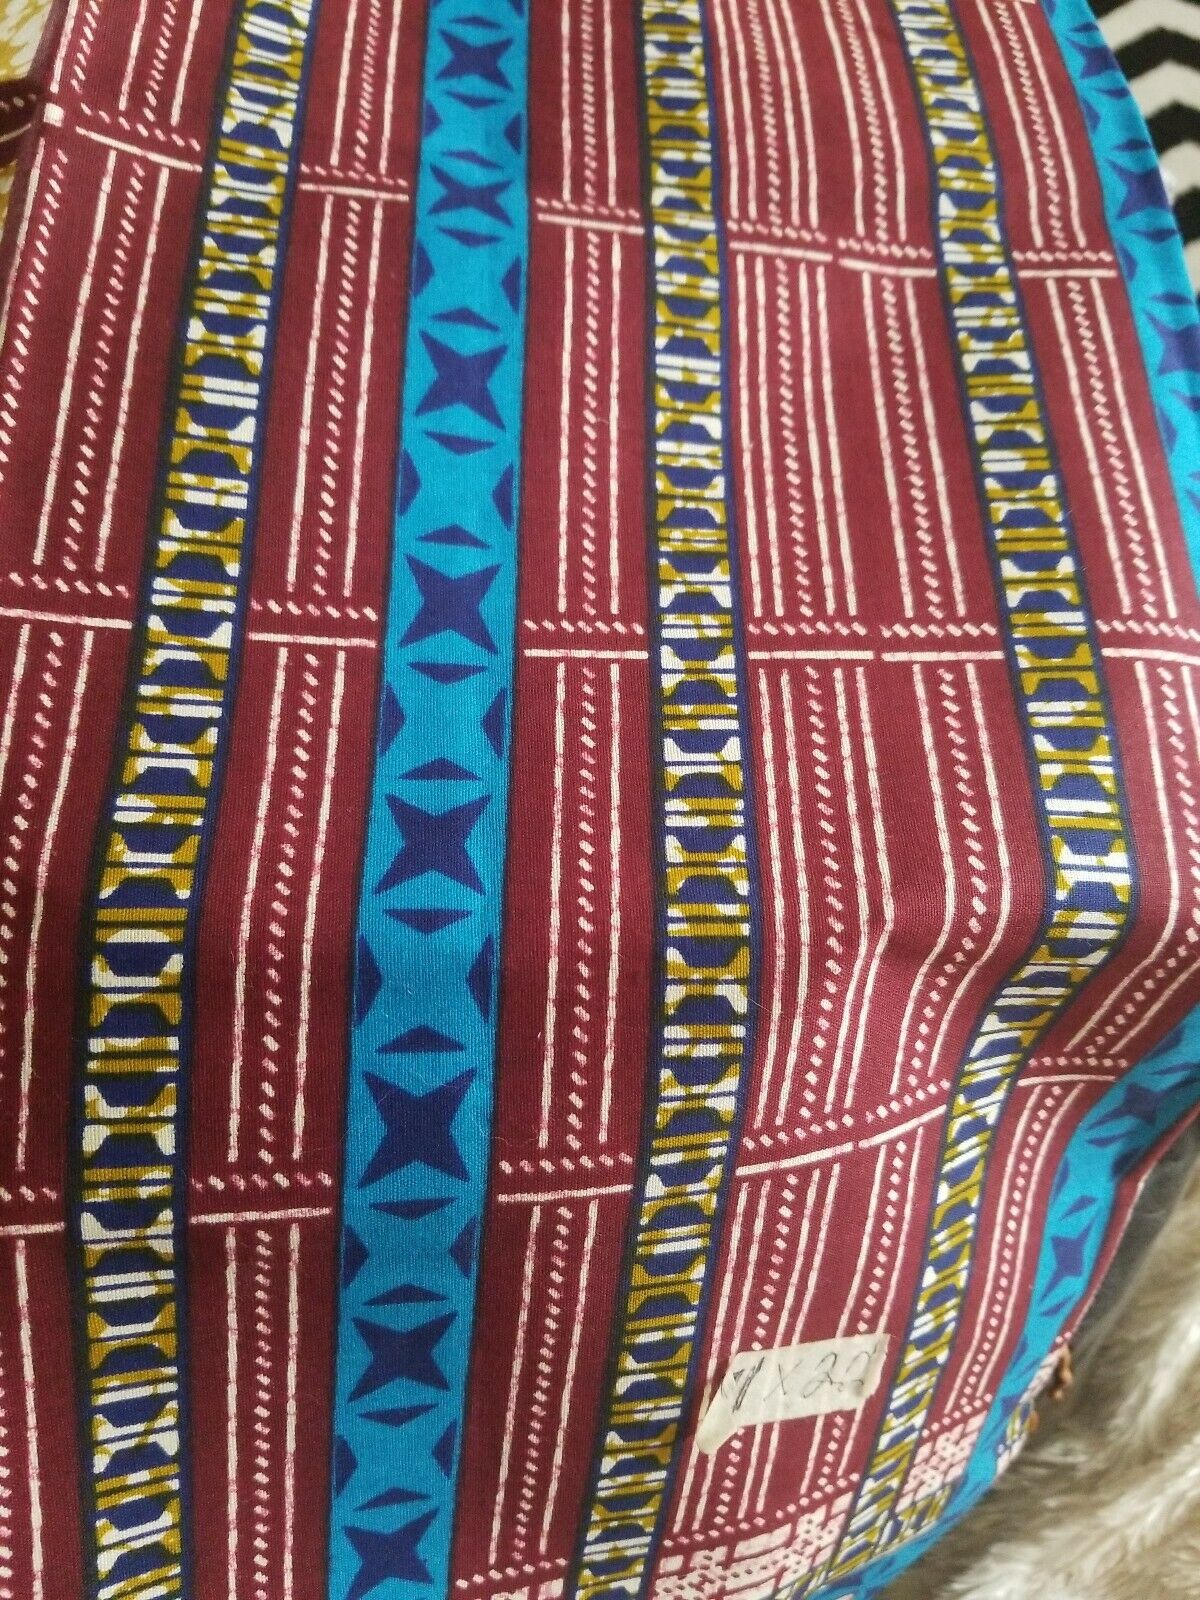 Blue MULTICOLOR African Wax Print 100% Cotton Fabric ~2yards,44" INCHES